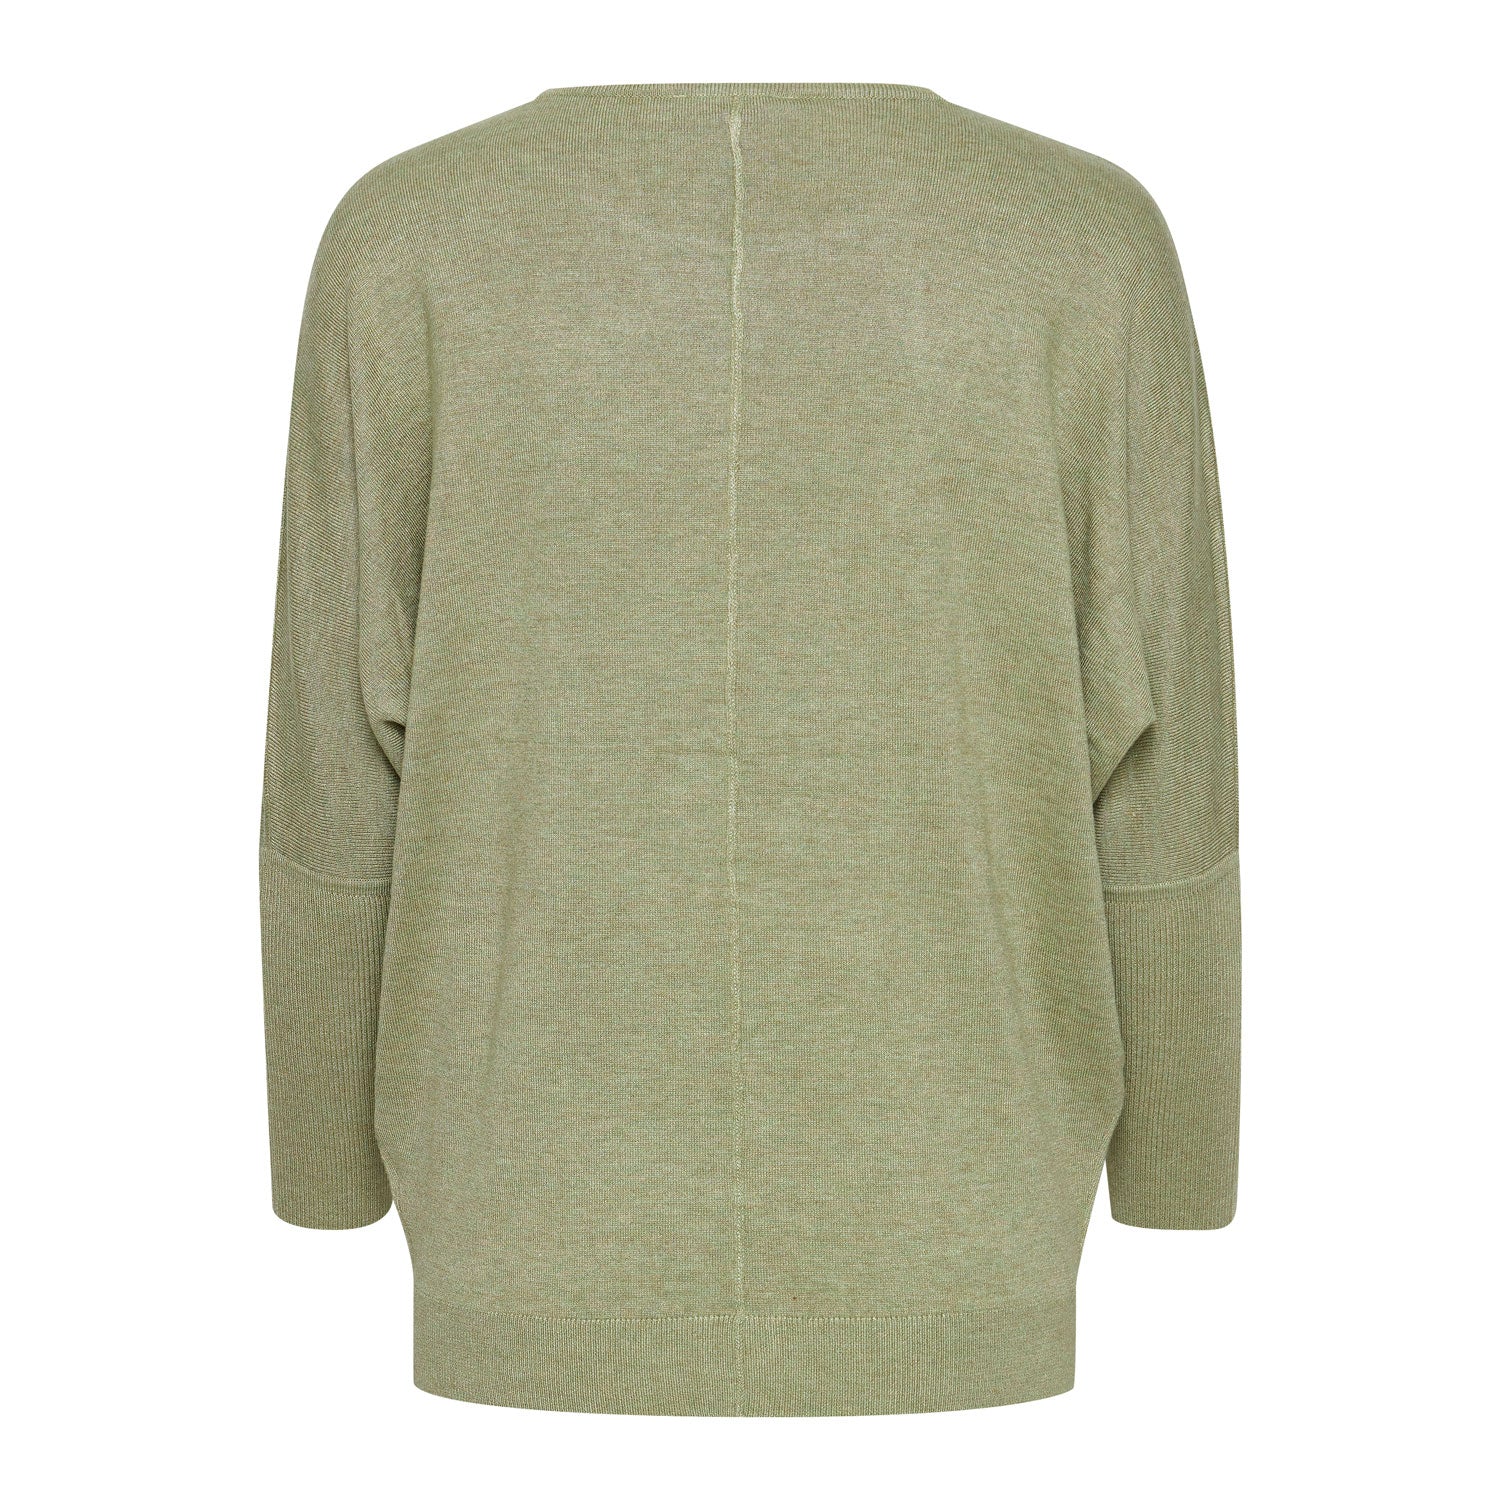 B.young Pimba Batwing Jumper - Sage Green 2 Shaws Department Stores